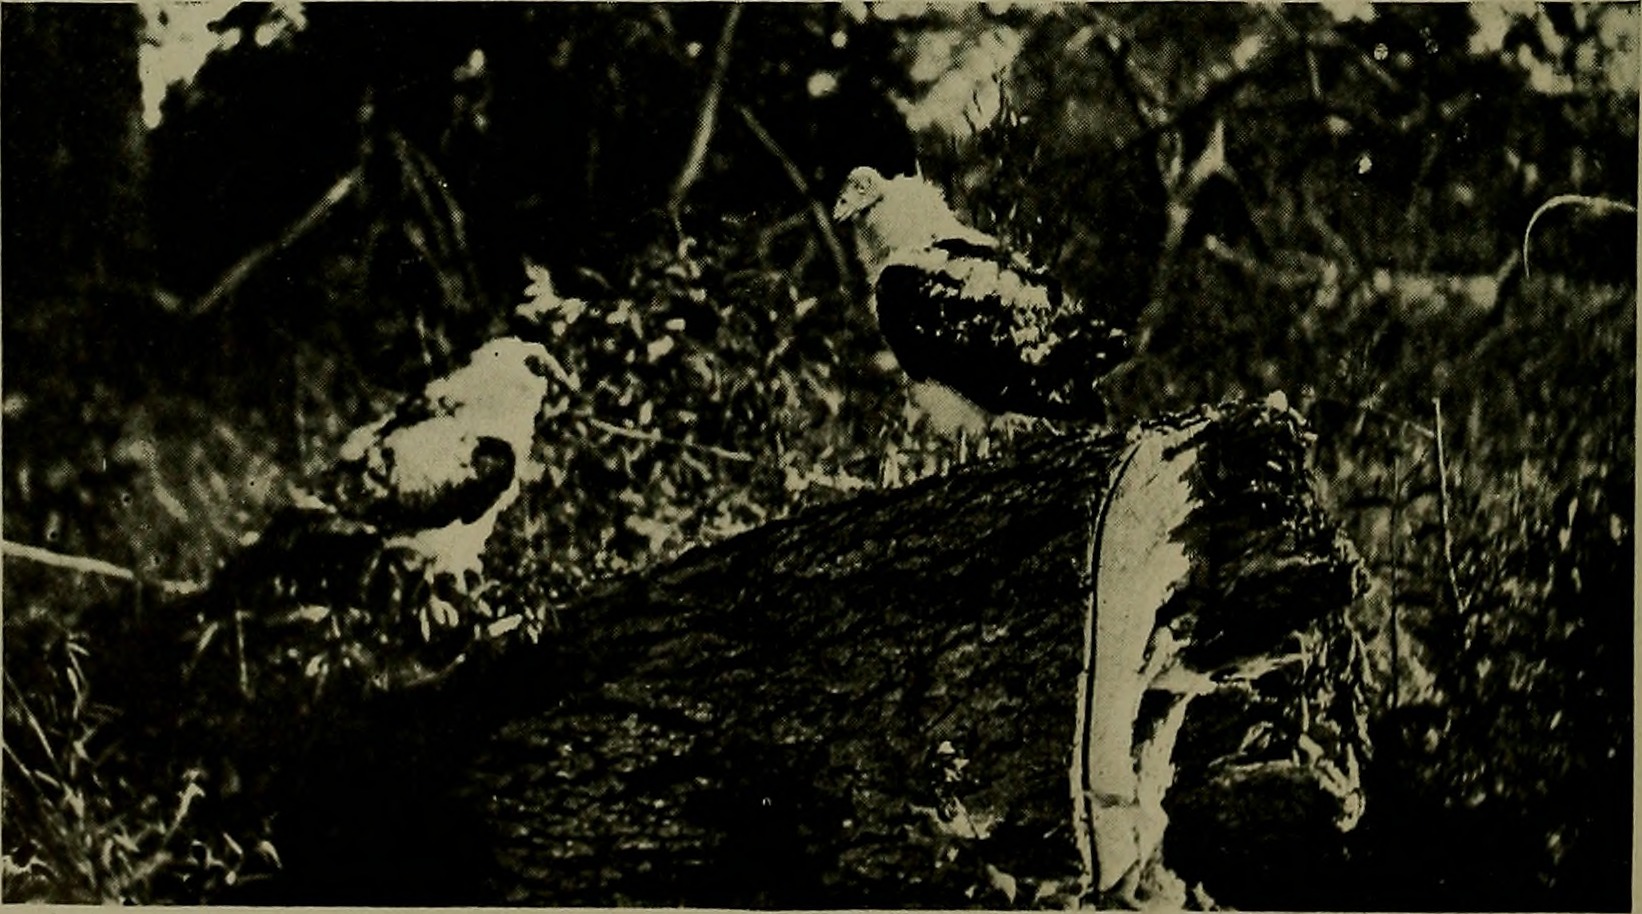 Image from page 345 of "Bird lore" (1899)